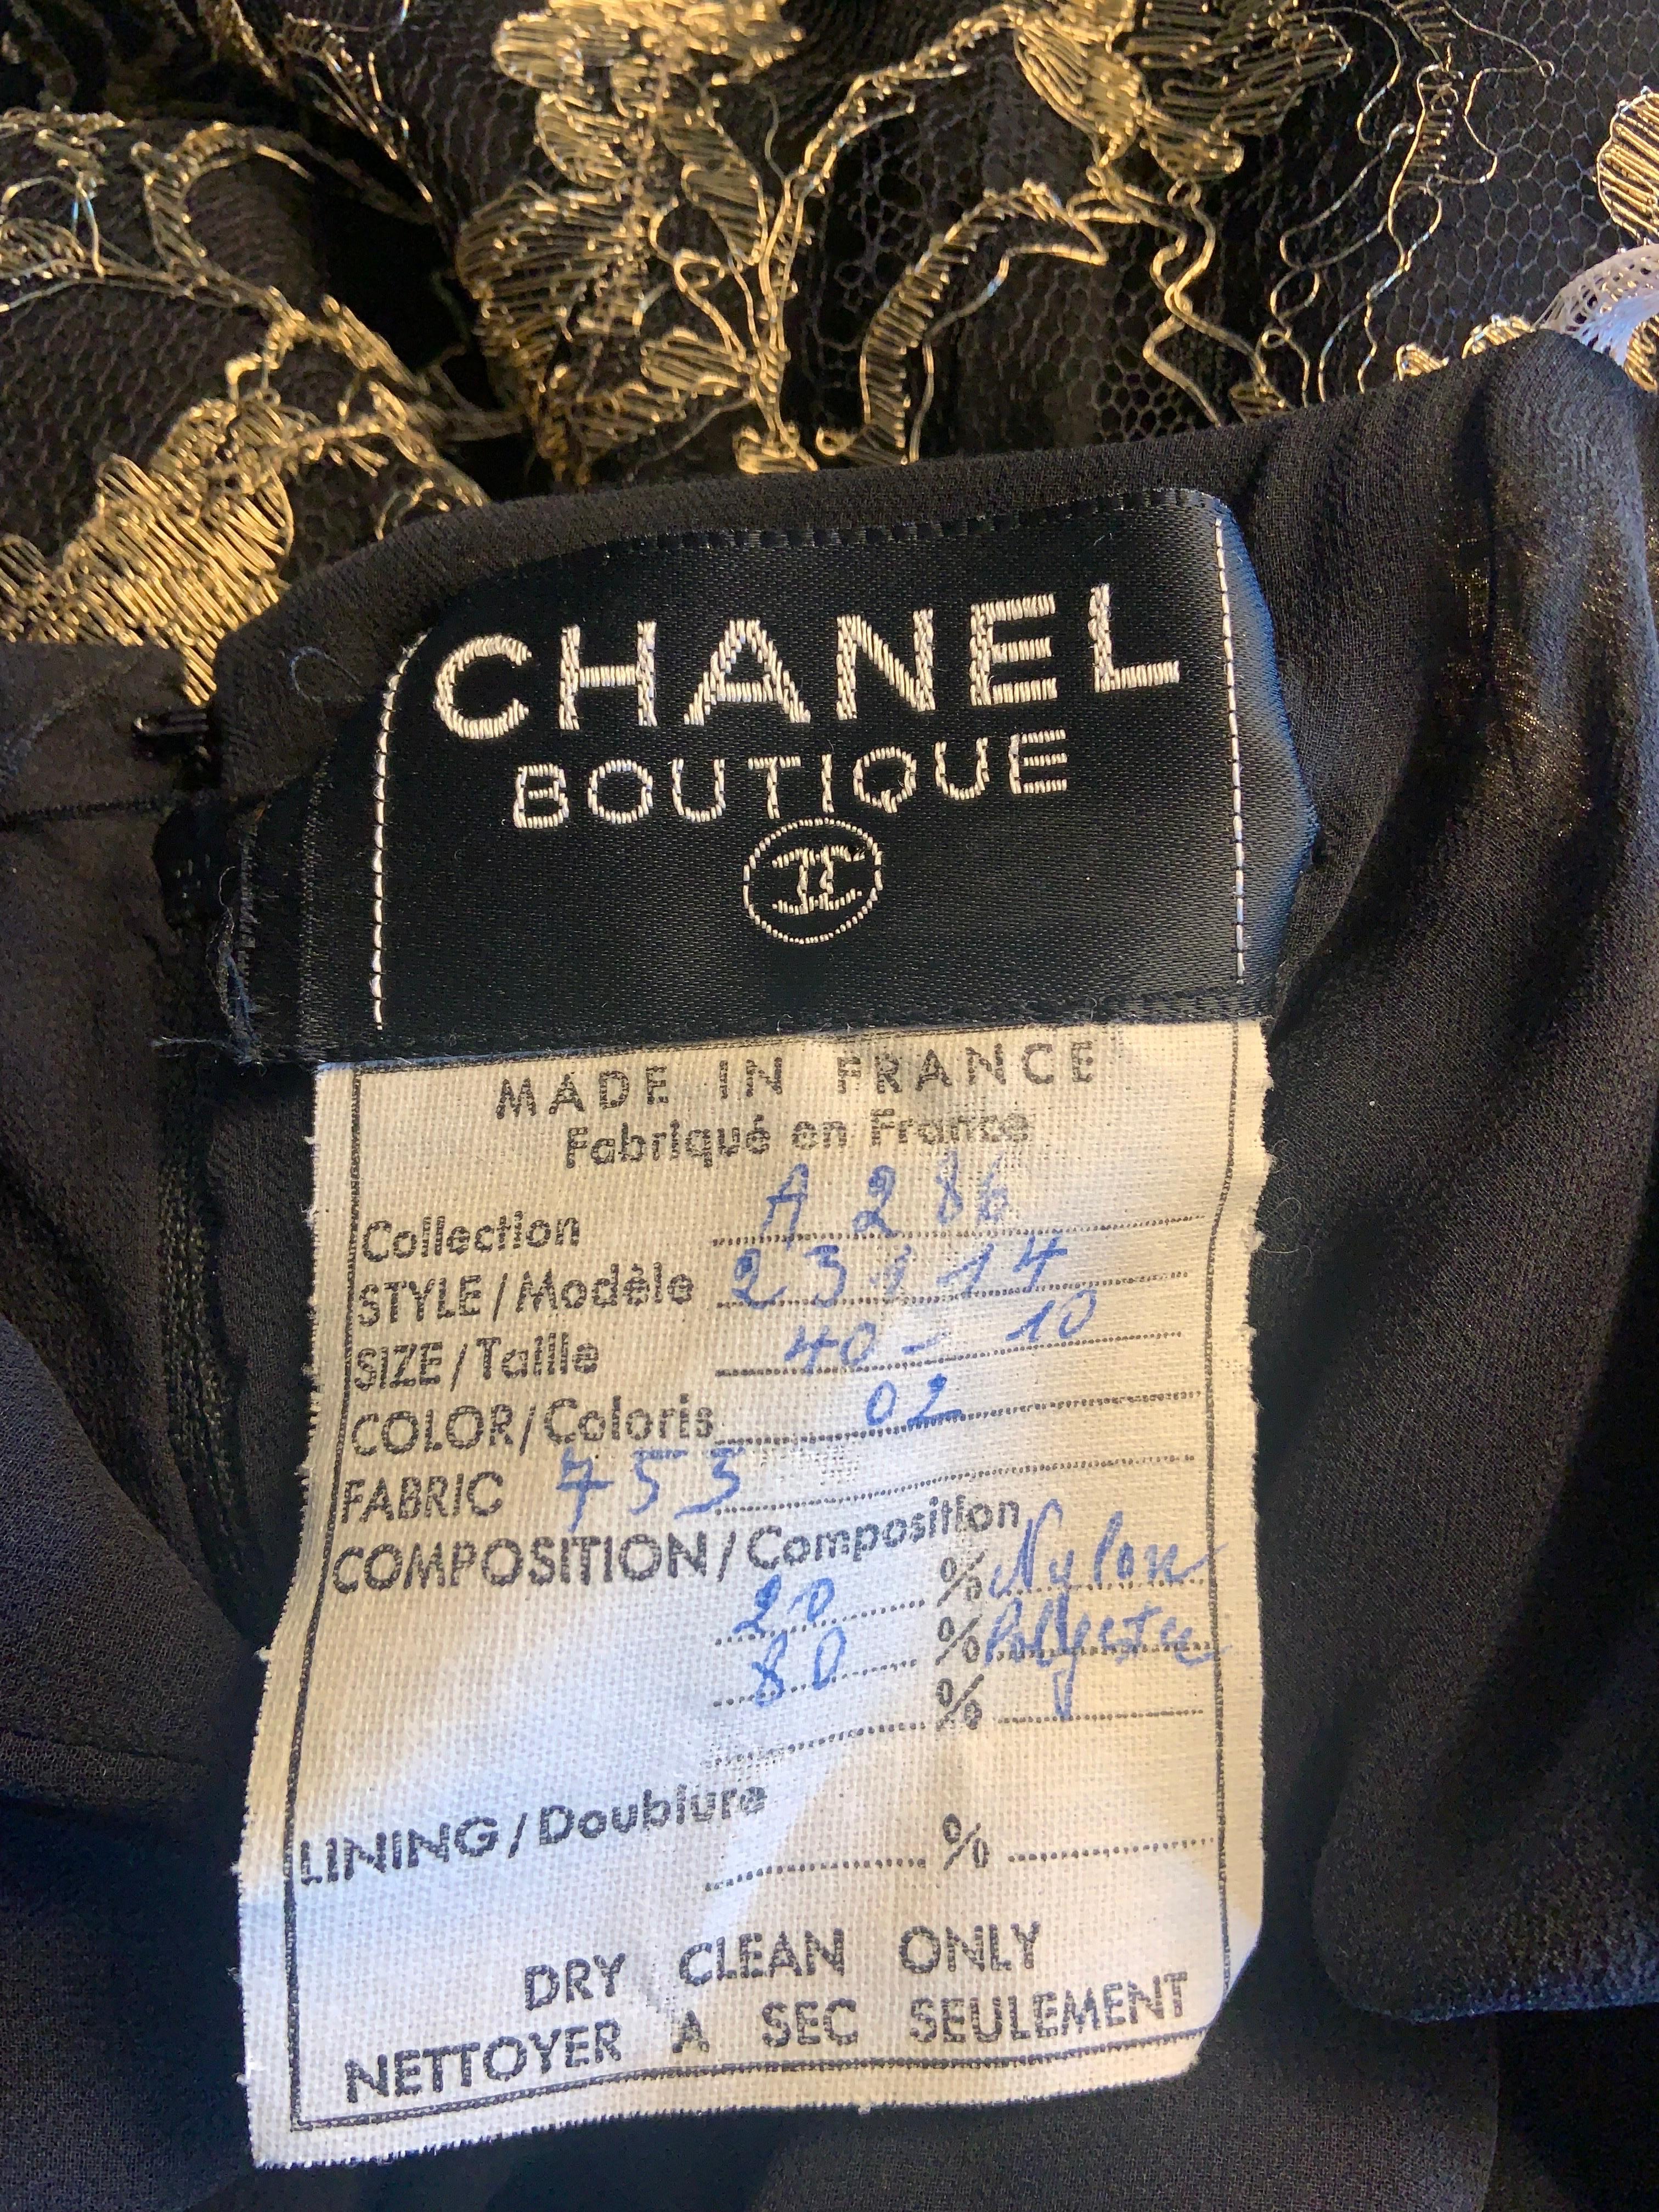 1986 Chanel by Karl Lagerfeld Gold and Black Lace Gown with Train Original Tag For Sale 14